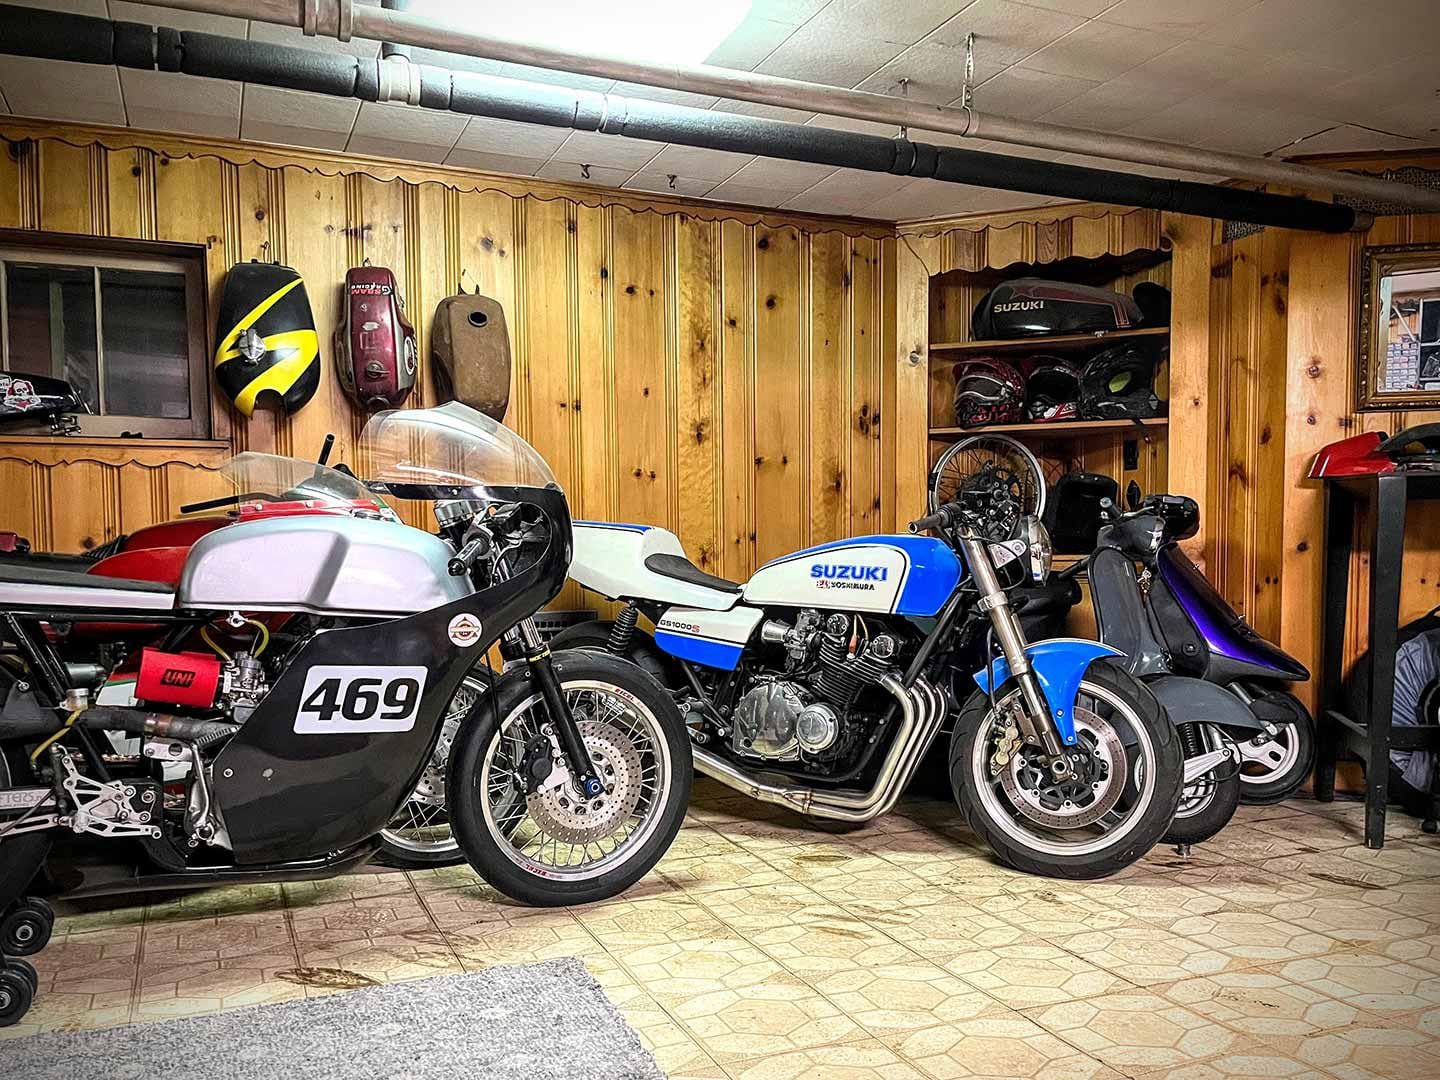 Motorcycles lurk mere feet under the living room. Matt Joy’s Honda CB350, Ducati single hidden behind, along with a Suzuki GS1000 Wes Cooley replica and sundry scooters.